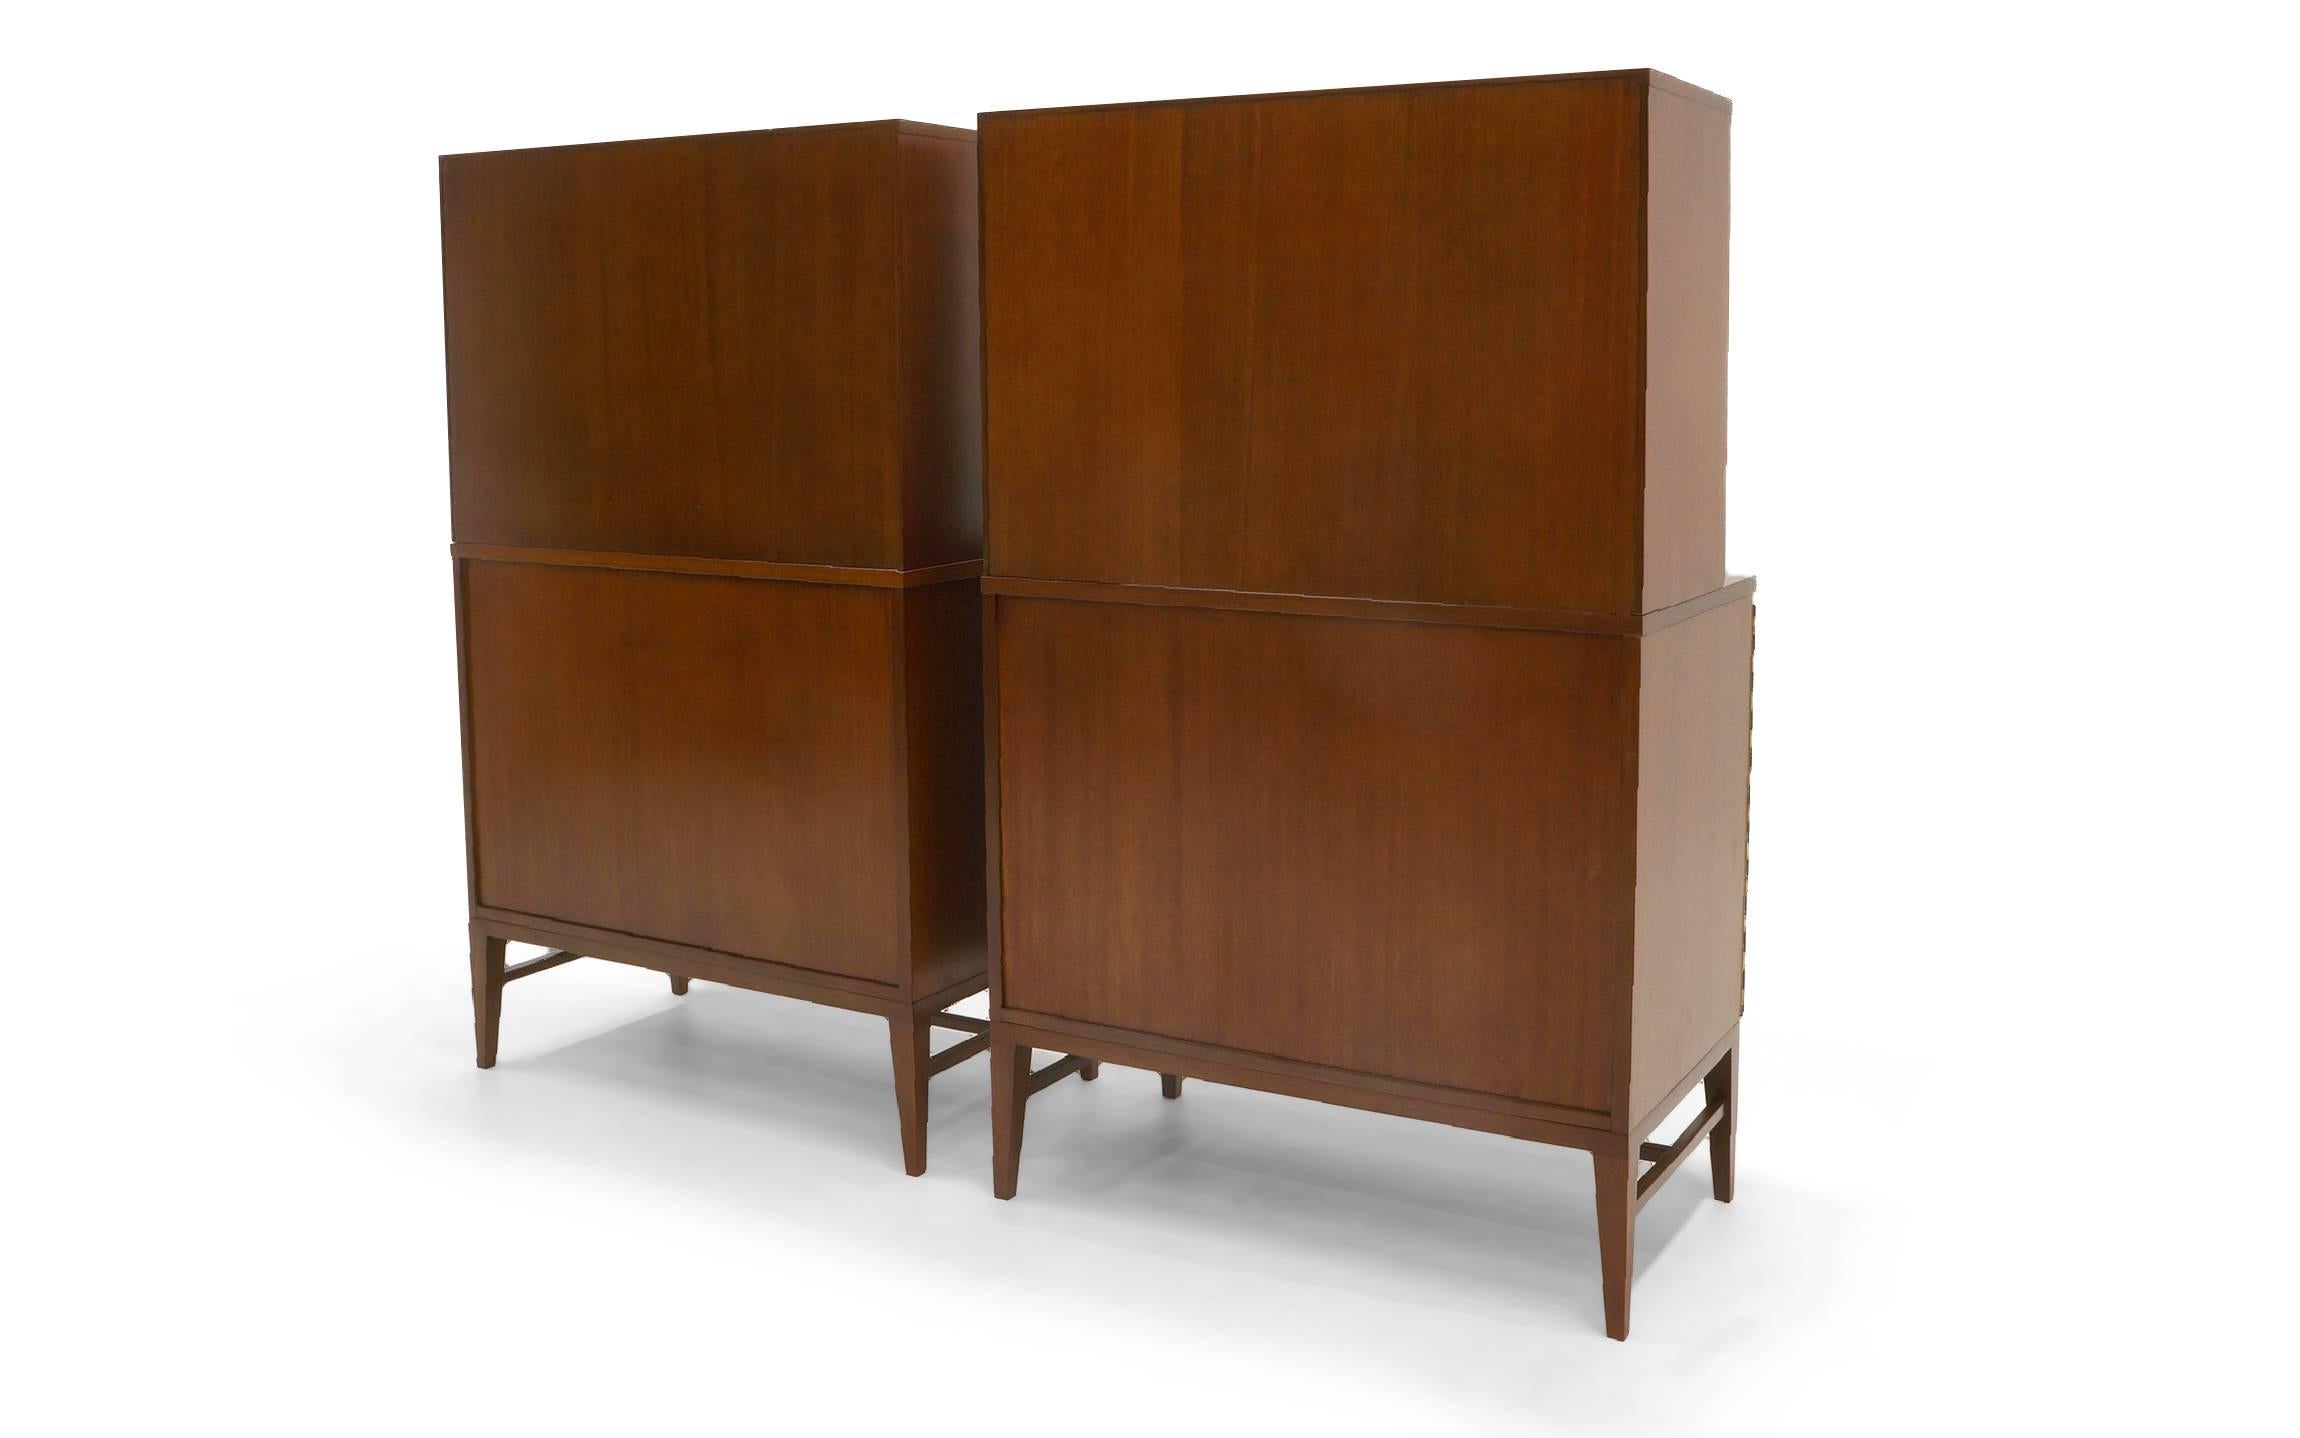 Pair of Paul McCobb Storage Cabinets for Use with or Without the Top Section 2